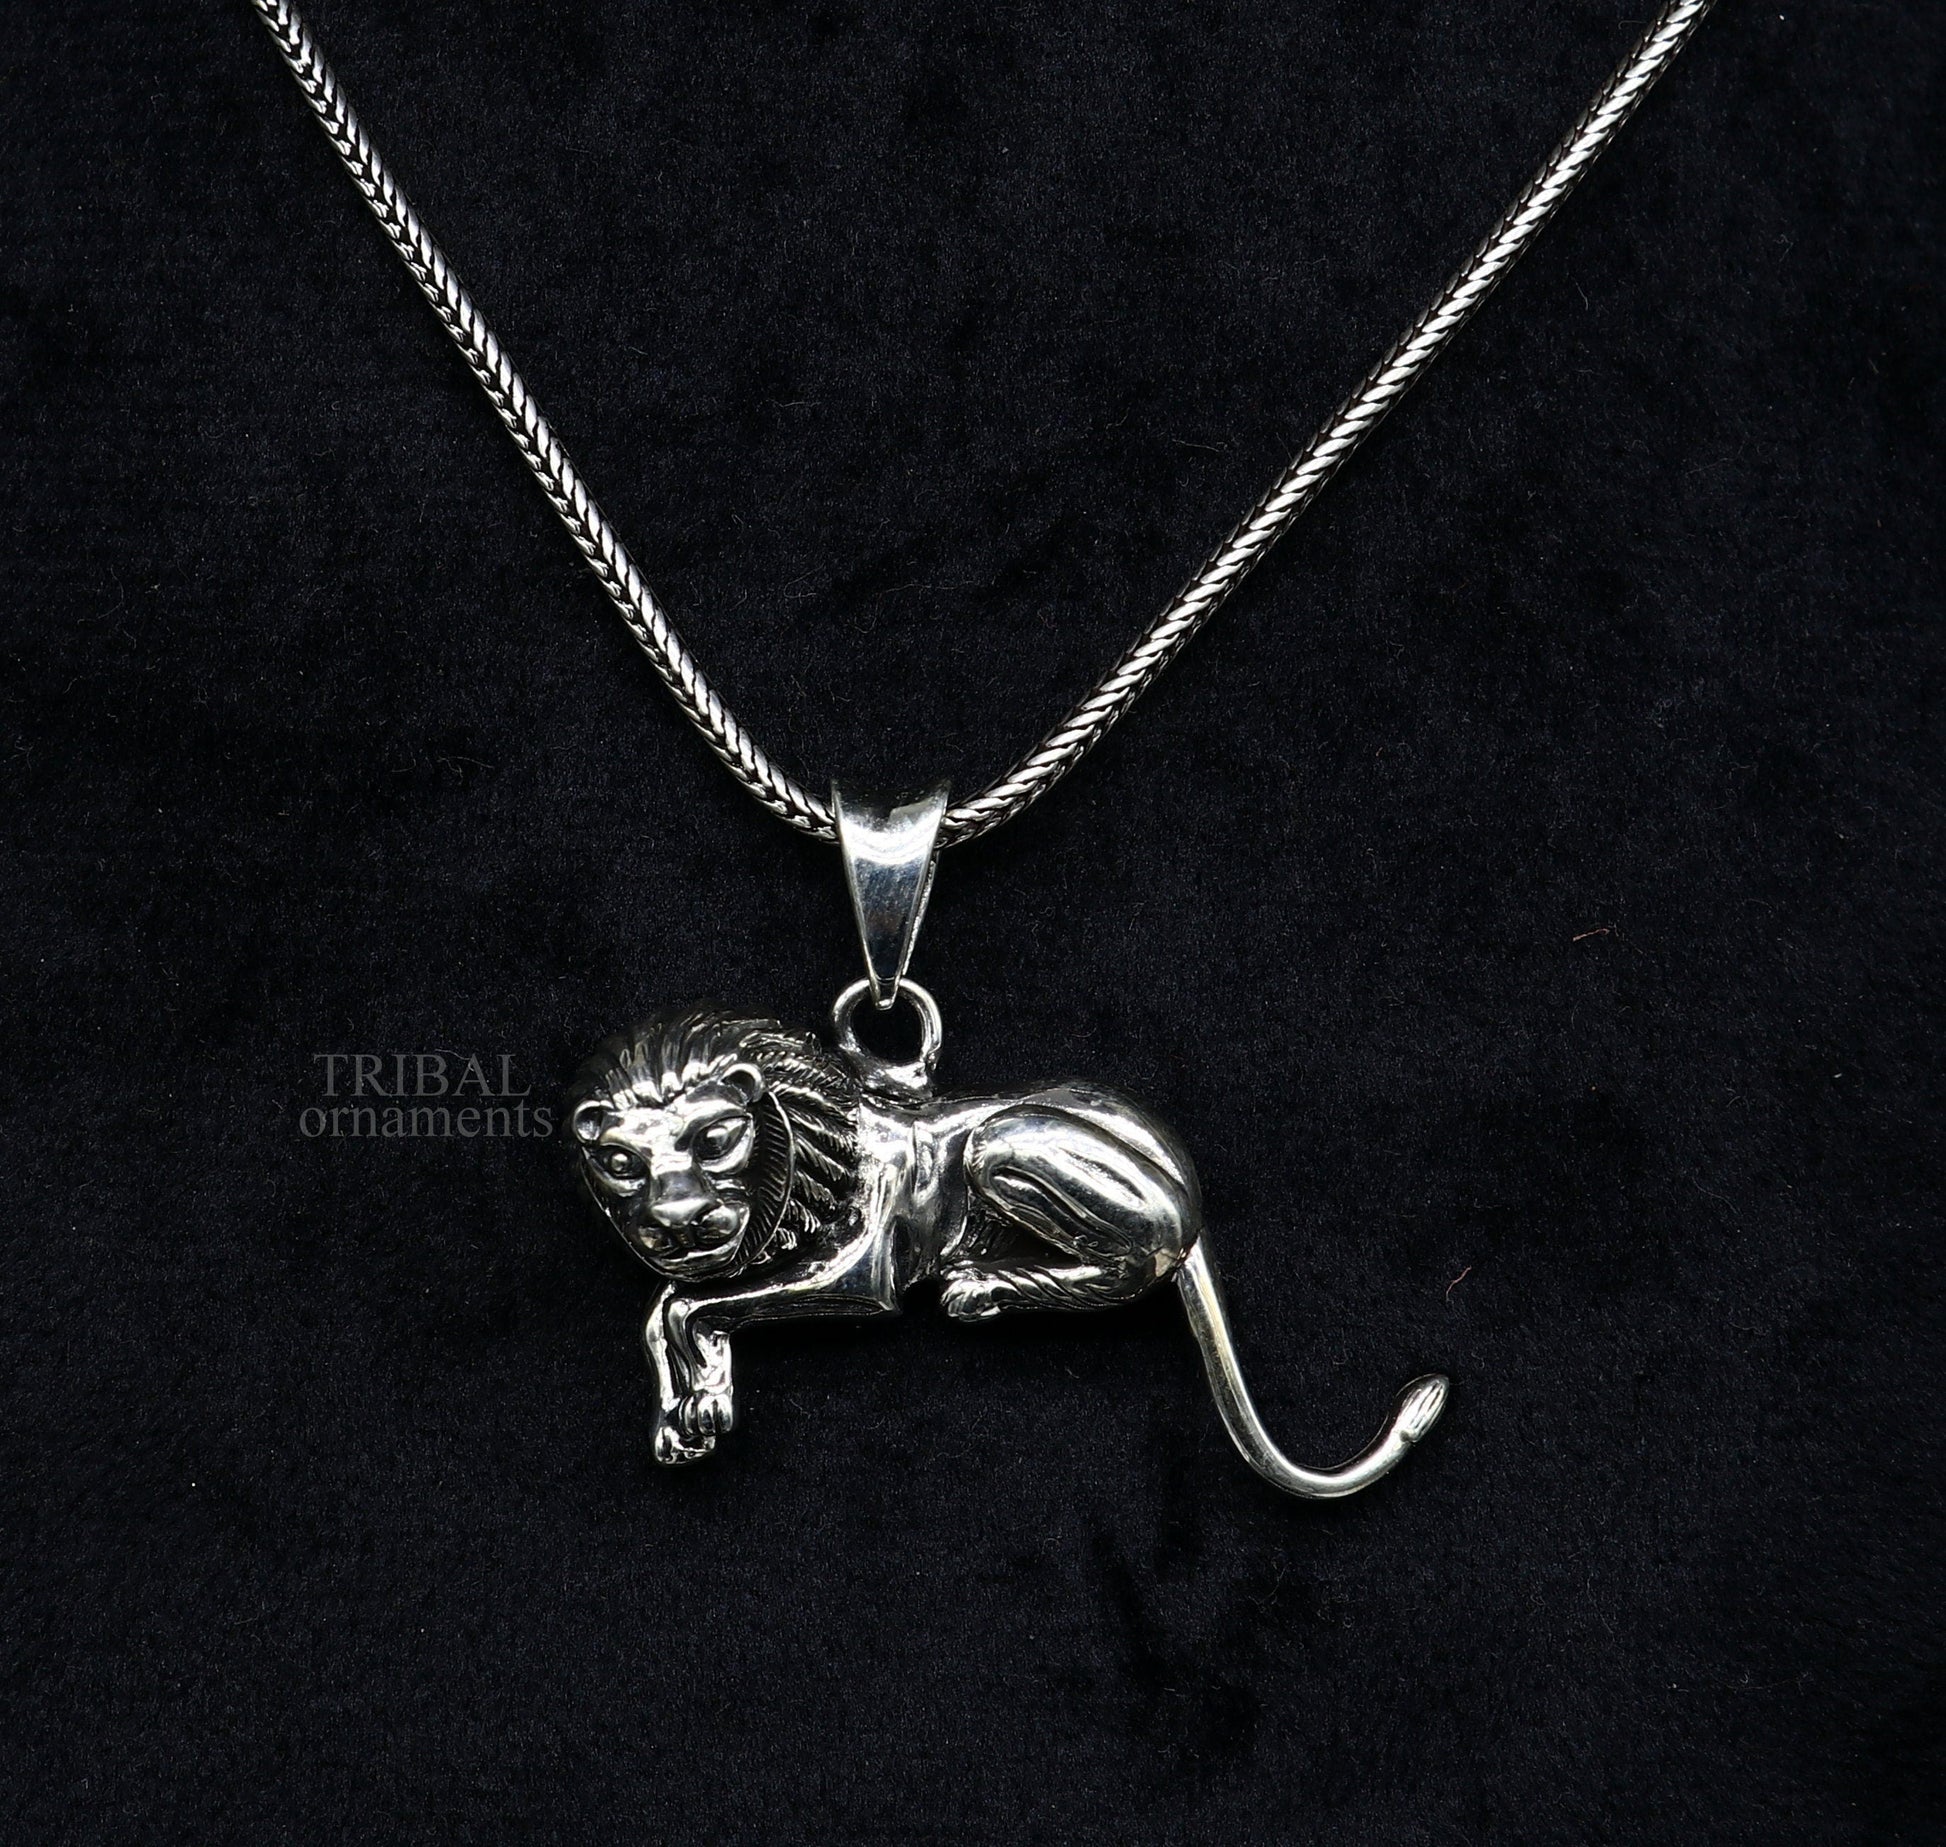 Amazing unique Elegant 925 sterling silver handmade lion design pendant solid pendant, best unisex gifting jewelry from india ssp1461 - TRIBAL ORNAMENTS